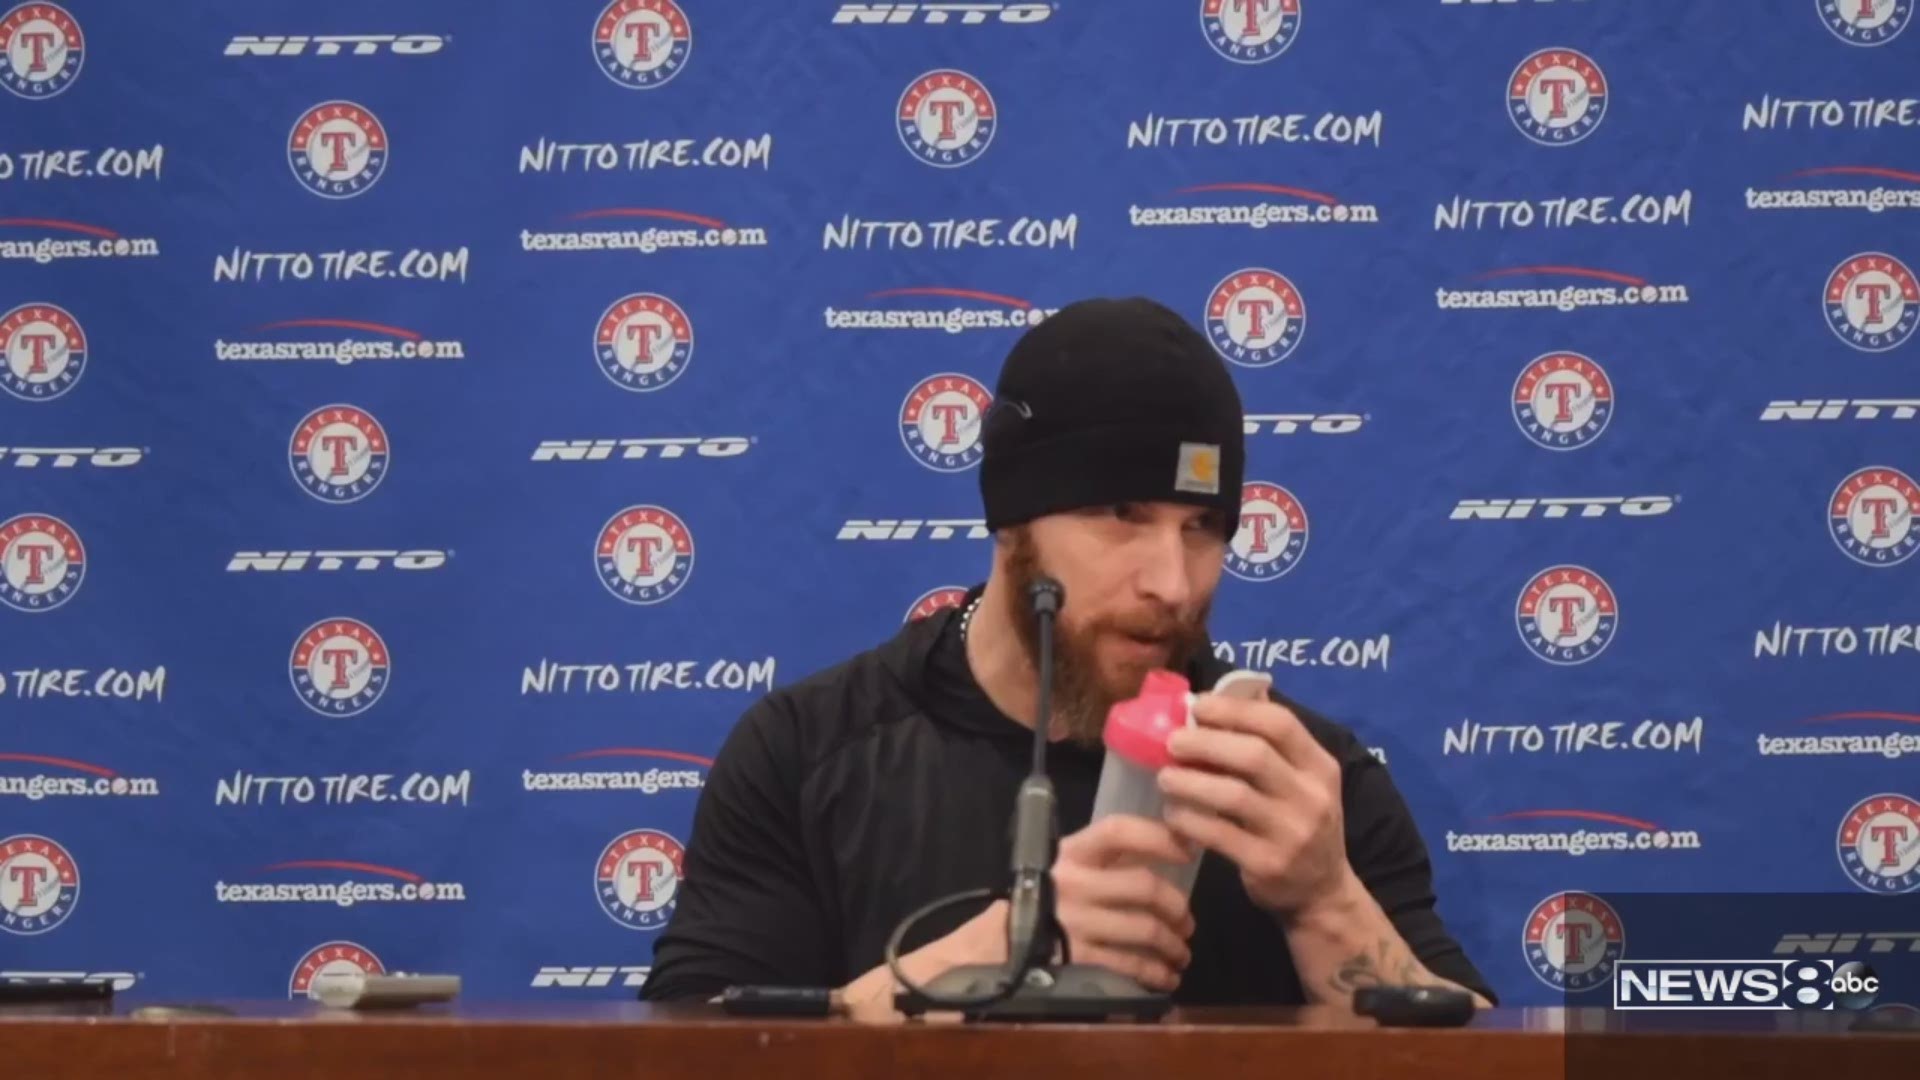 Josh Hamilton and the glowing stone of belief